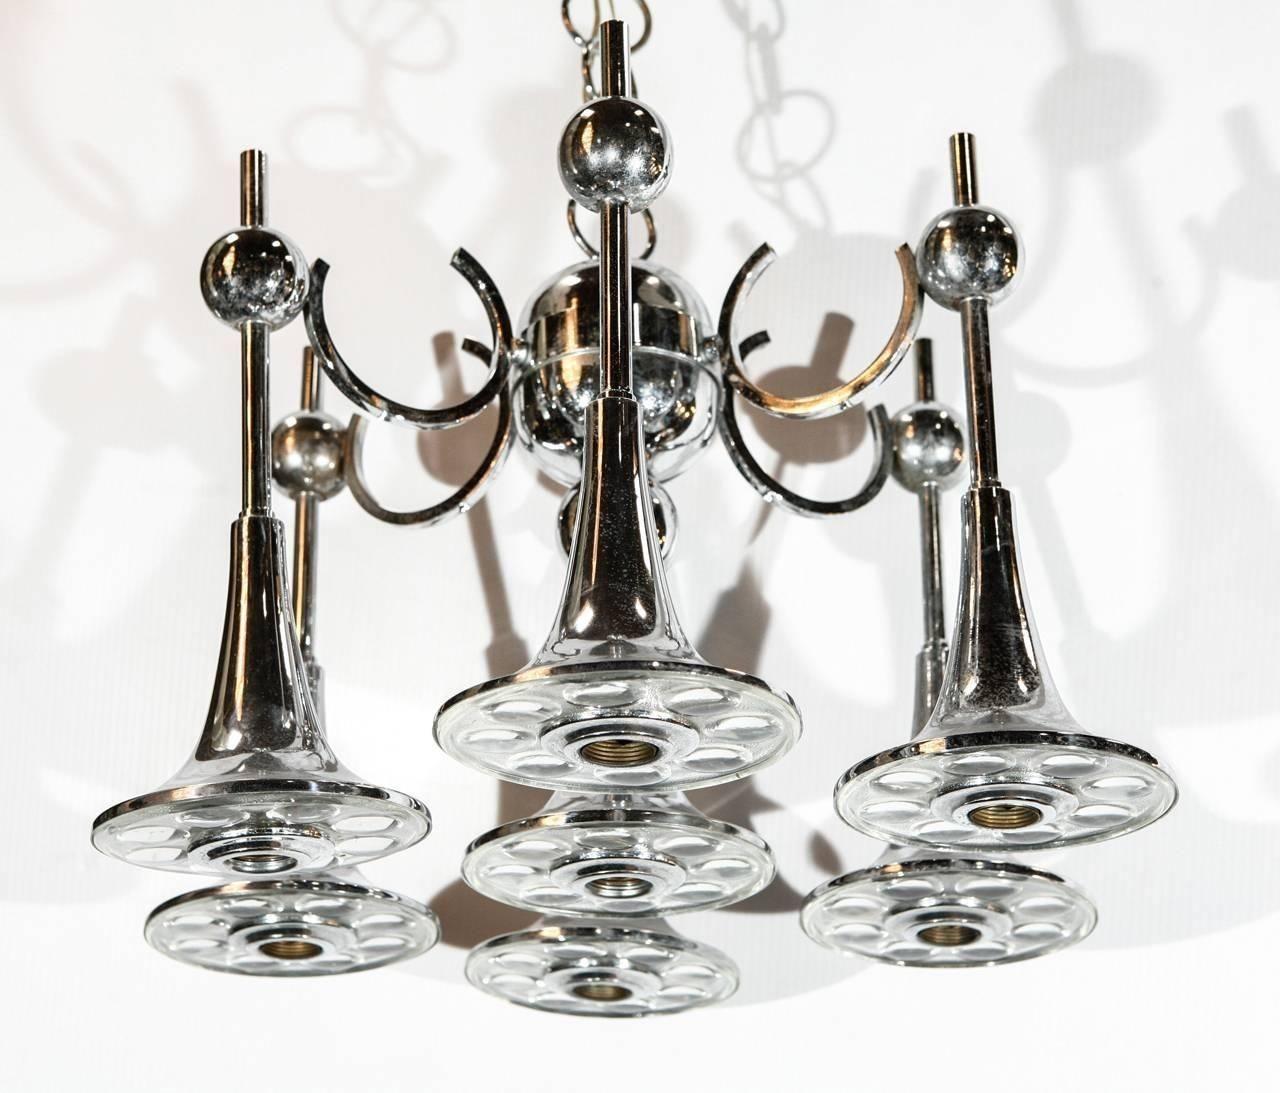 Vintage chandelier with unique trumpet design, consisting of a chrome frame and Murano glasses in each of its seven lights. Made in Italy, c. 1970's by Gaetano Sciolari, known for his Mid-century Modern lighting fixtures.
*The chain is adjustable to